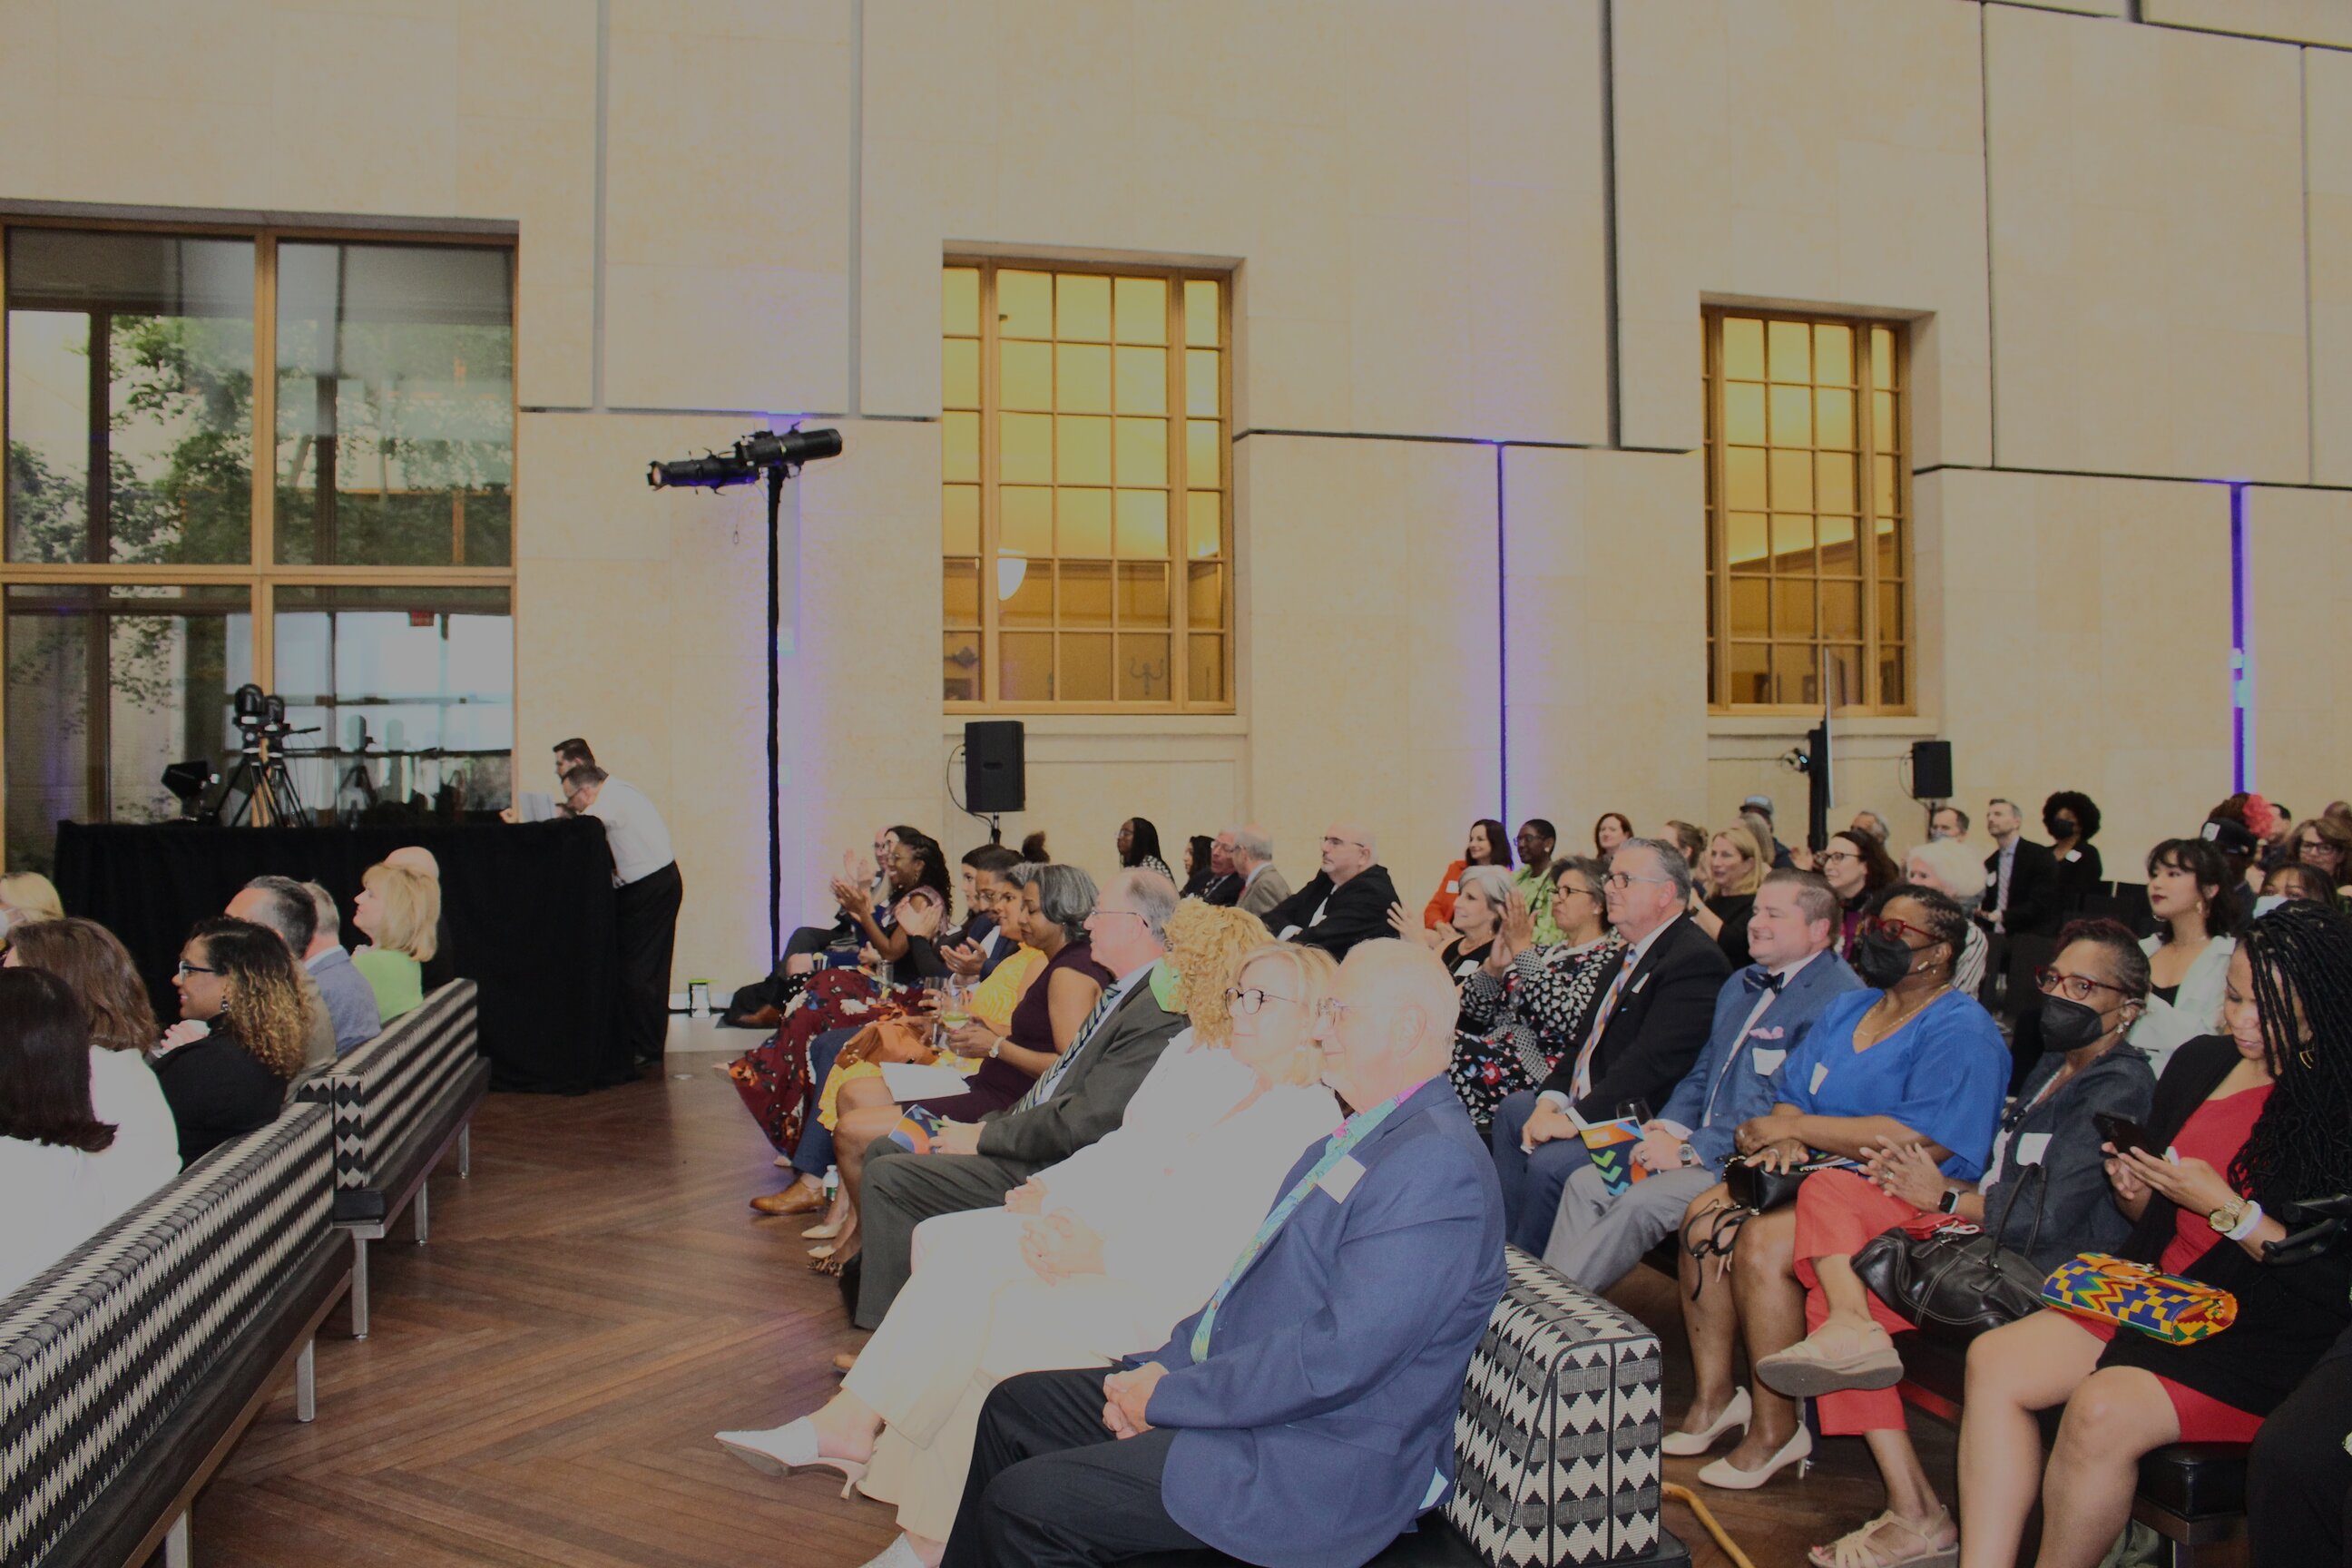 The 37th Annual Arts + Business Council Awards took place at the Barnes Foundation on Wednesday, May 25. Photo: Emily Leopard-Davis/AL DÍA News.